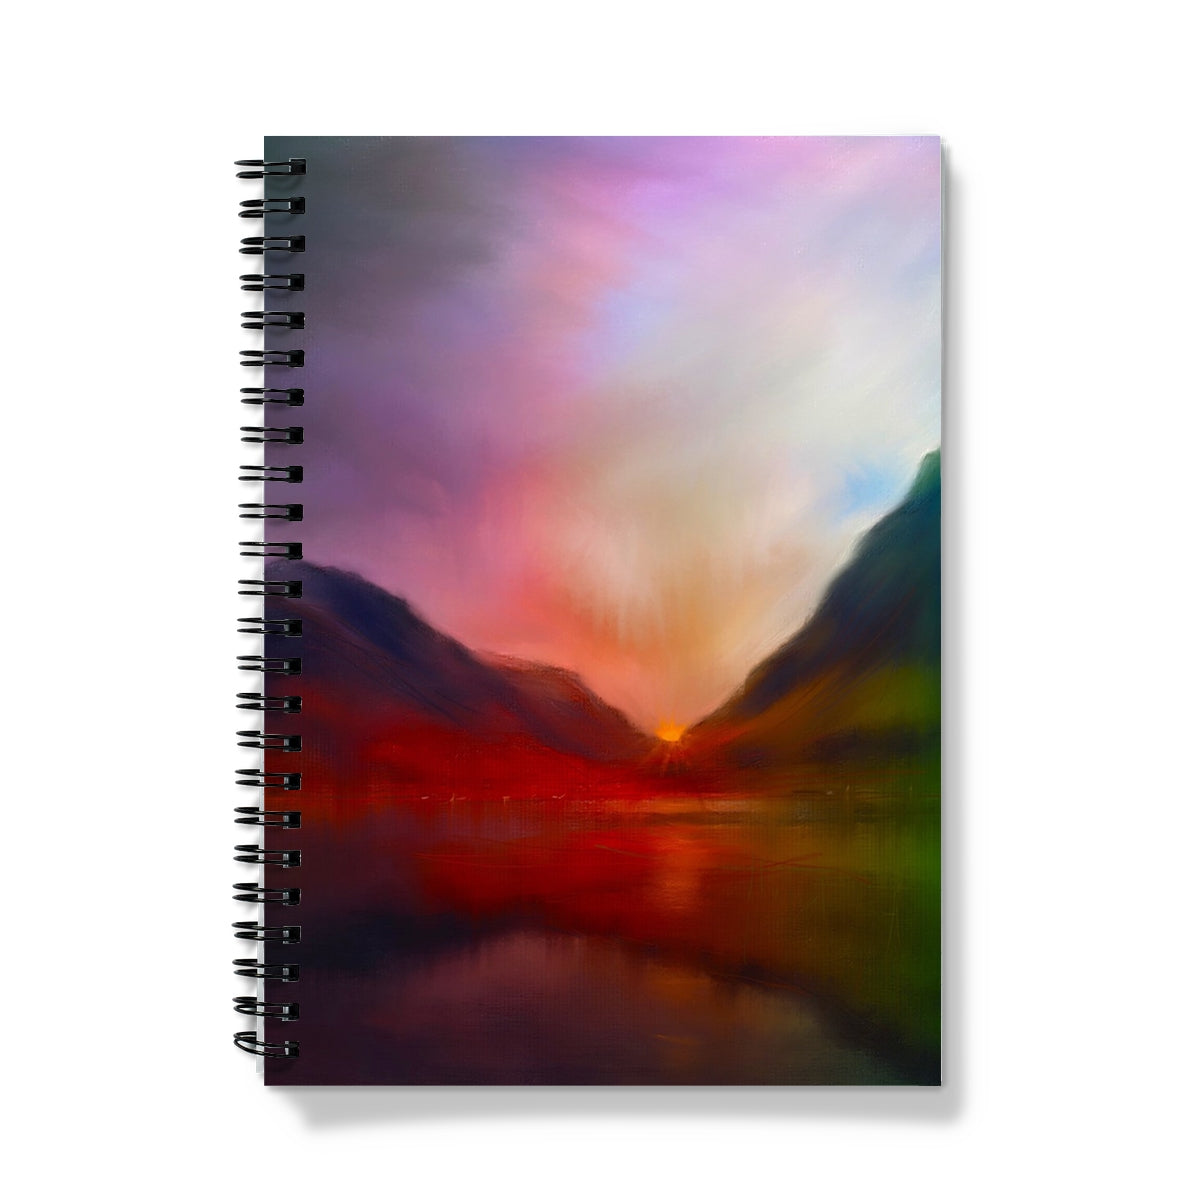 Glencoe Sunset Art Gifts Notebook-Journals & Notebooks-Glencoe Art Gallery-A5-Lined-Paintings, Prints, Homeware, Art Gifts From Scotland By Scottish Artist Kevin Hunter